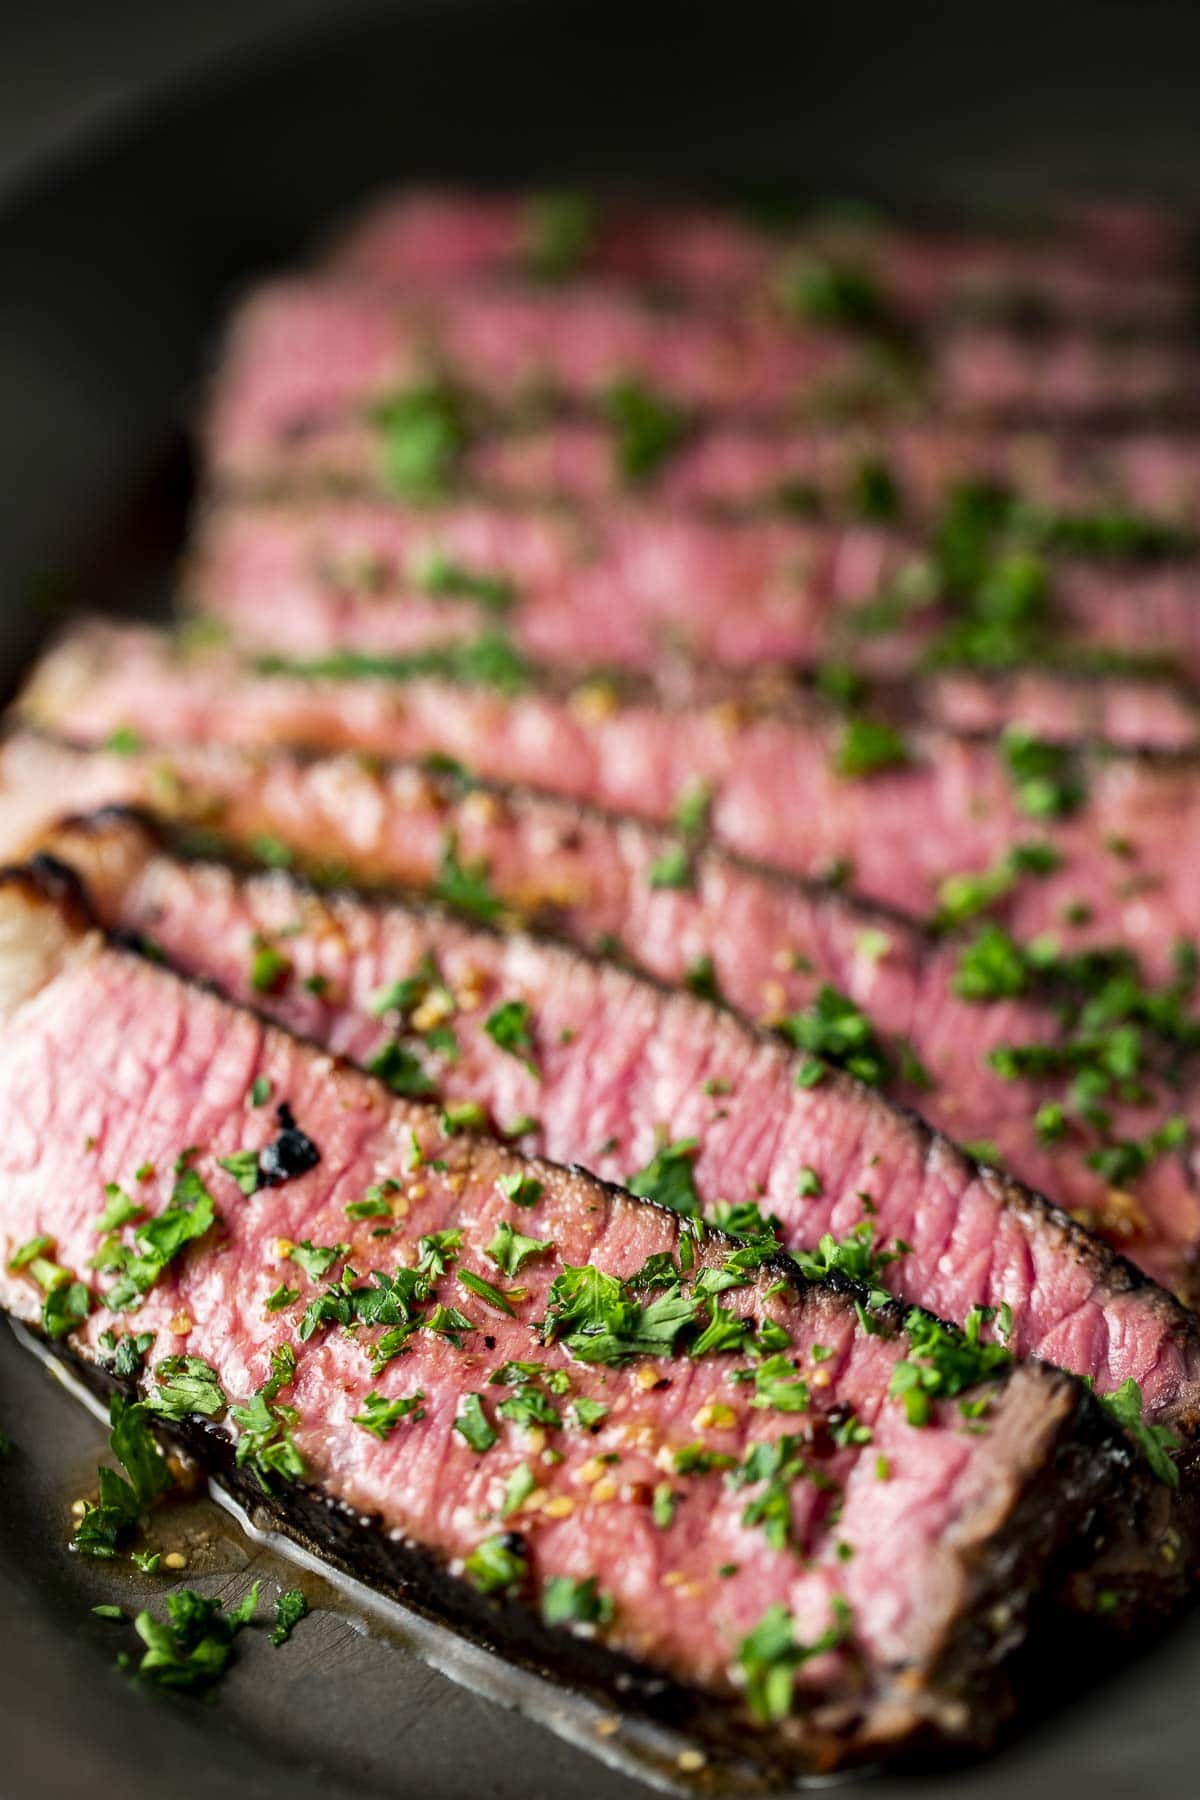 Steak cut across the grain and topped with chopped herbs.